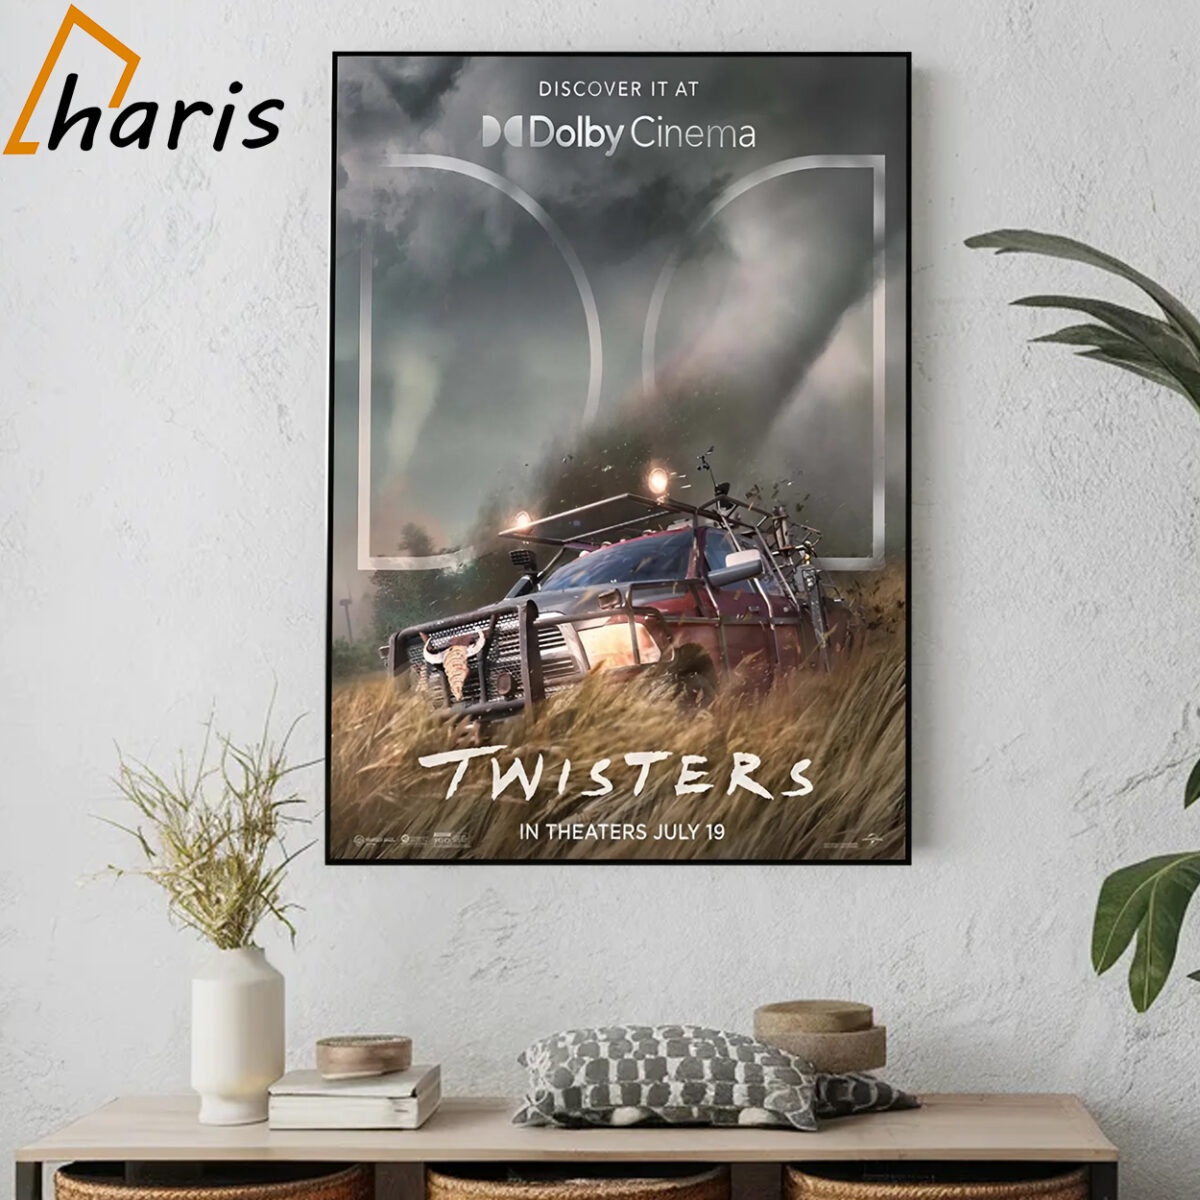 New Dolby Poster For Twisters Releasing In Theaters On July 19 Poster